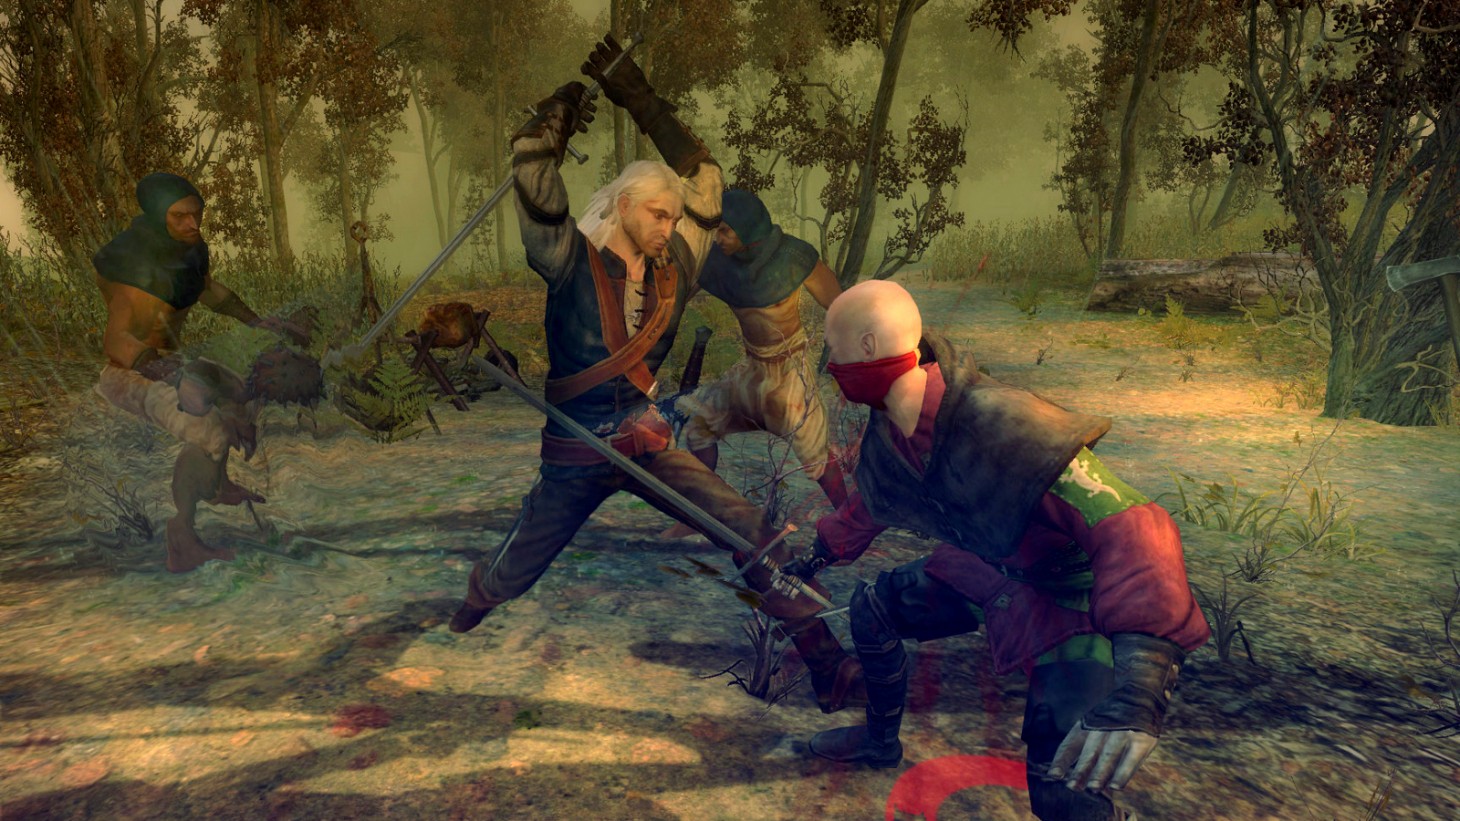 How the Witcher 1 Remake's Geralt Will Differ From The Witcher 3